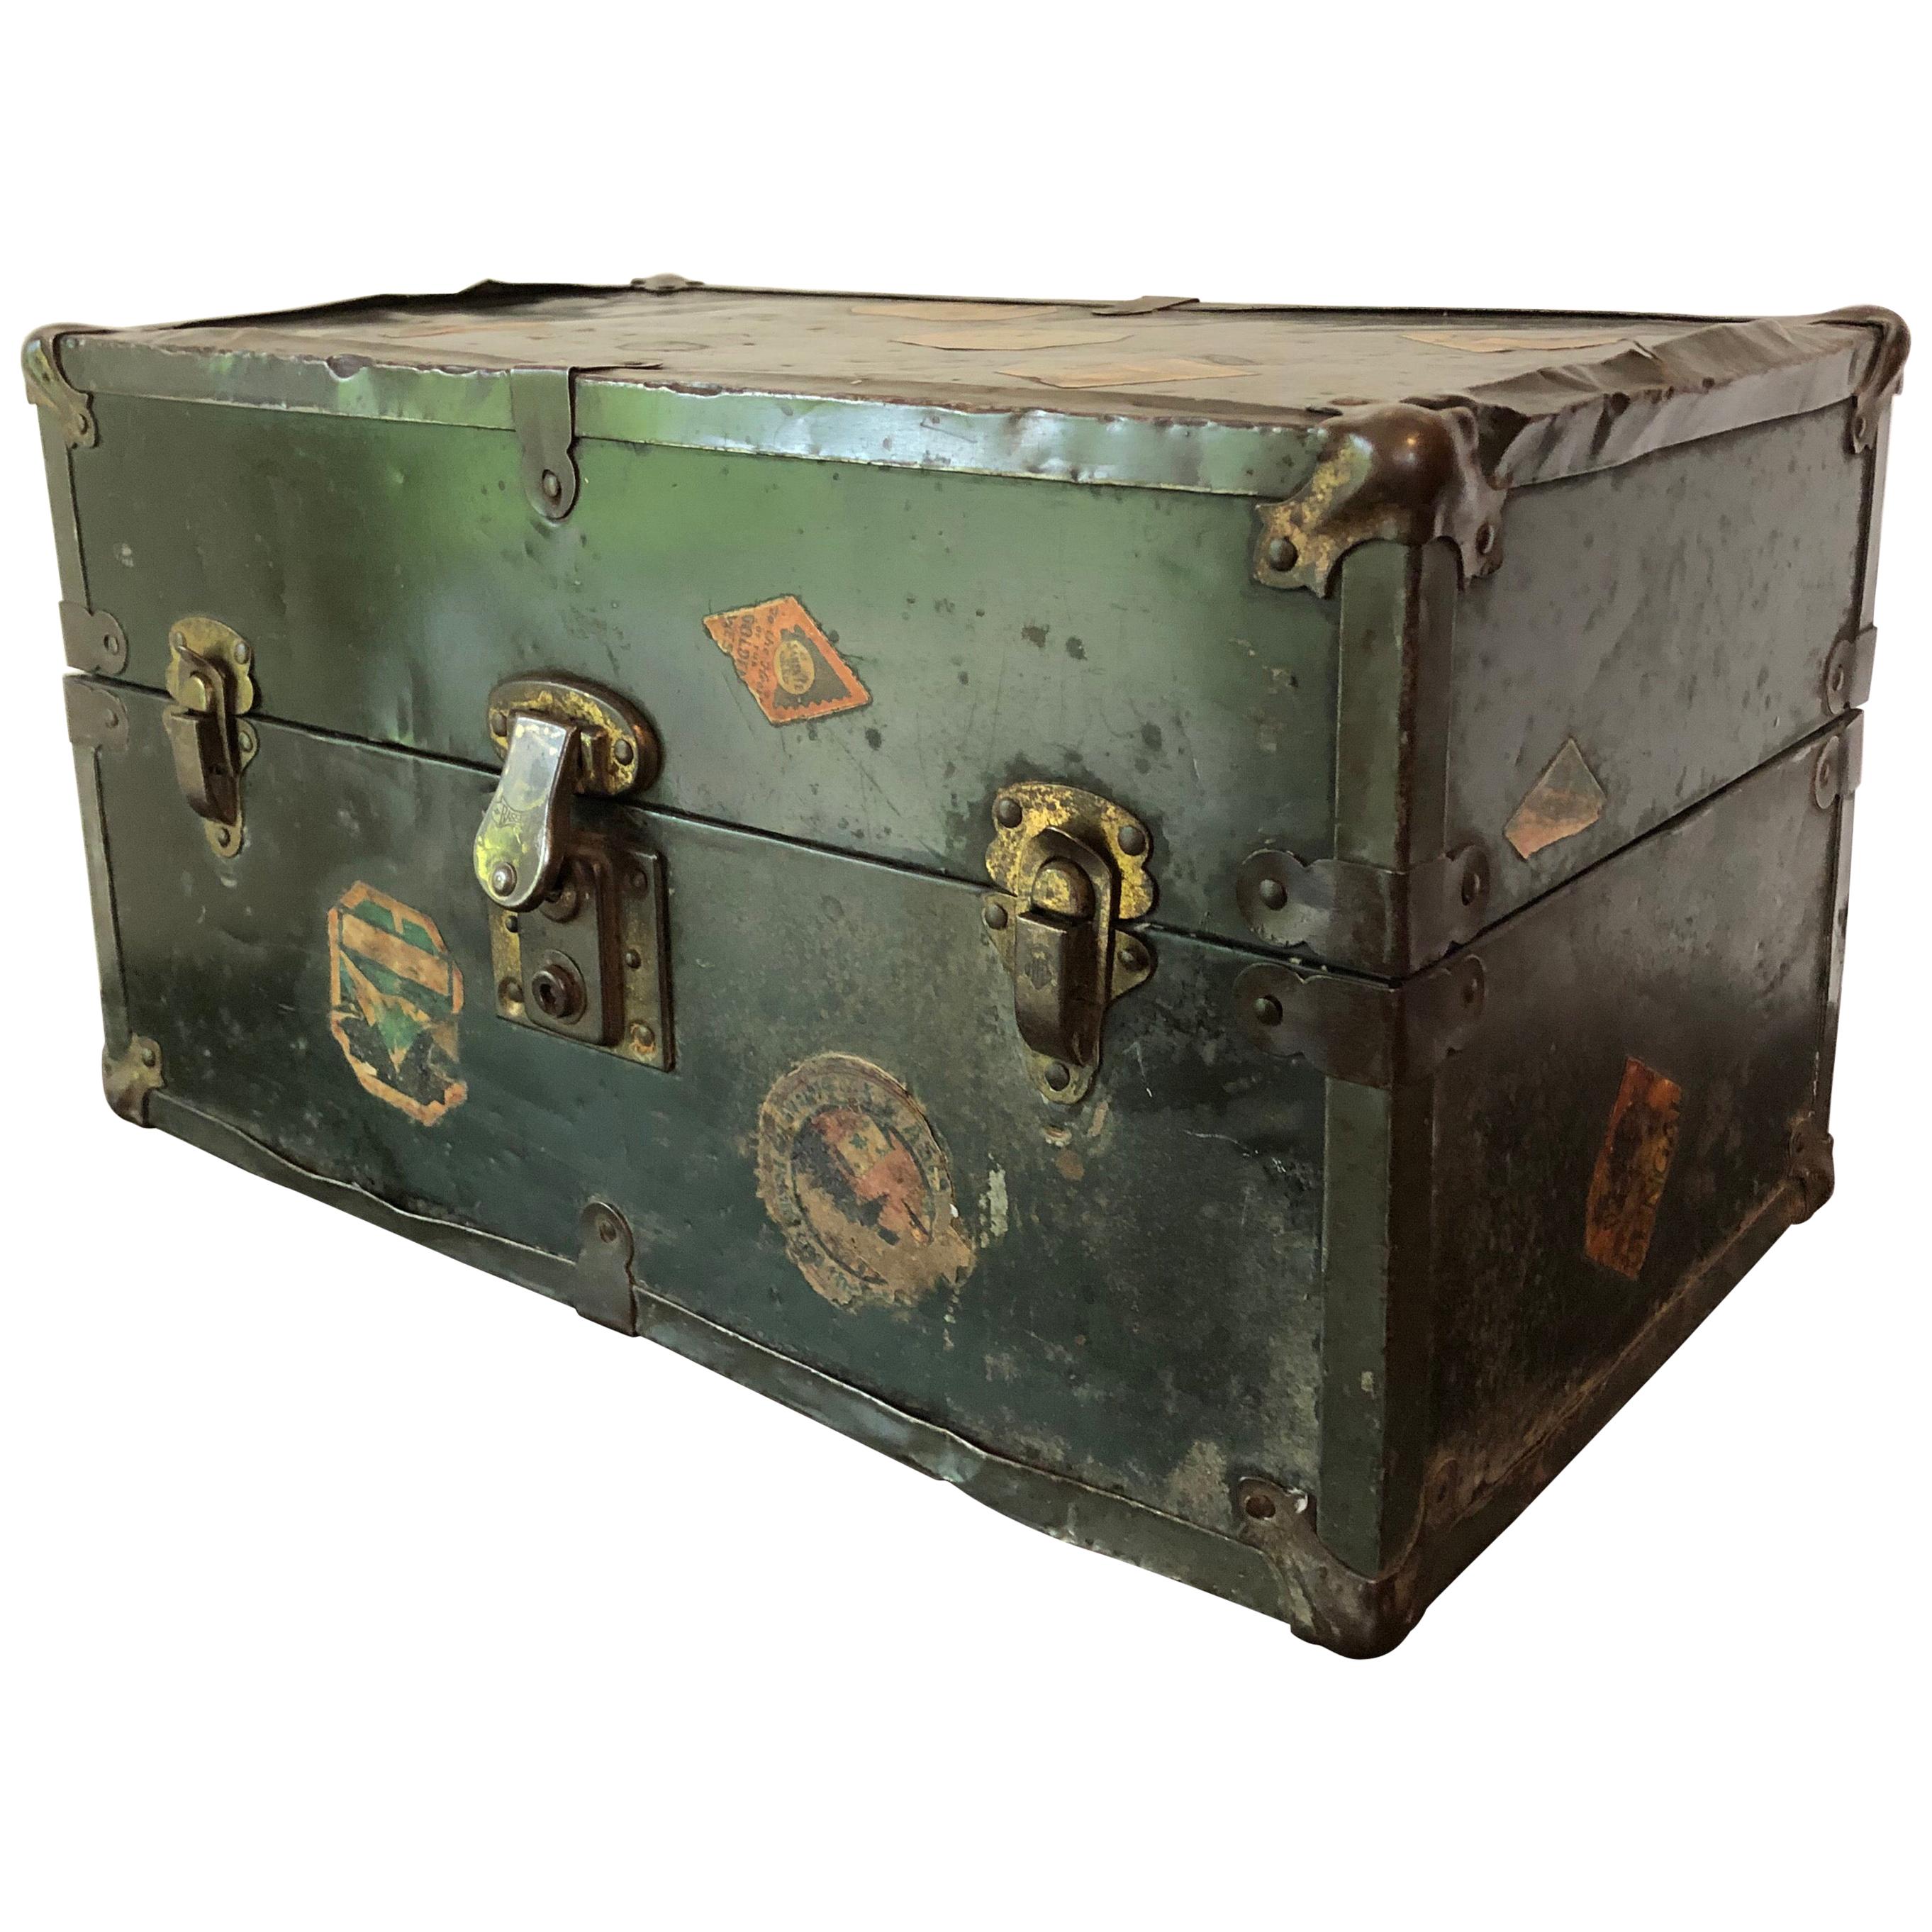 Antique and Vintage Trunks and Luggage at 1stdibs